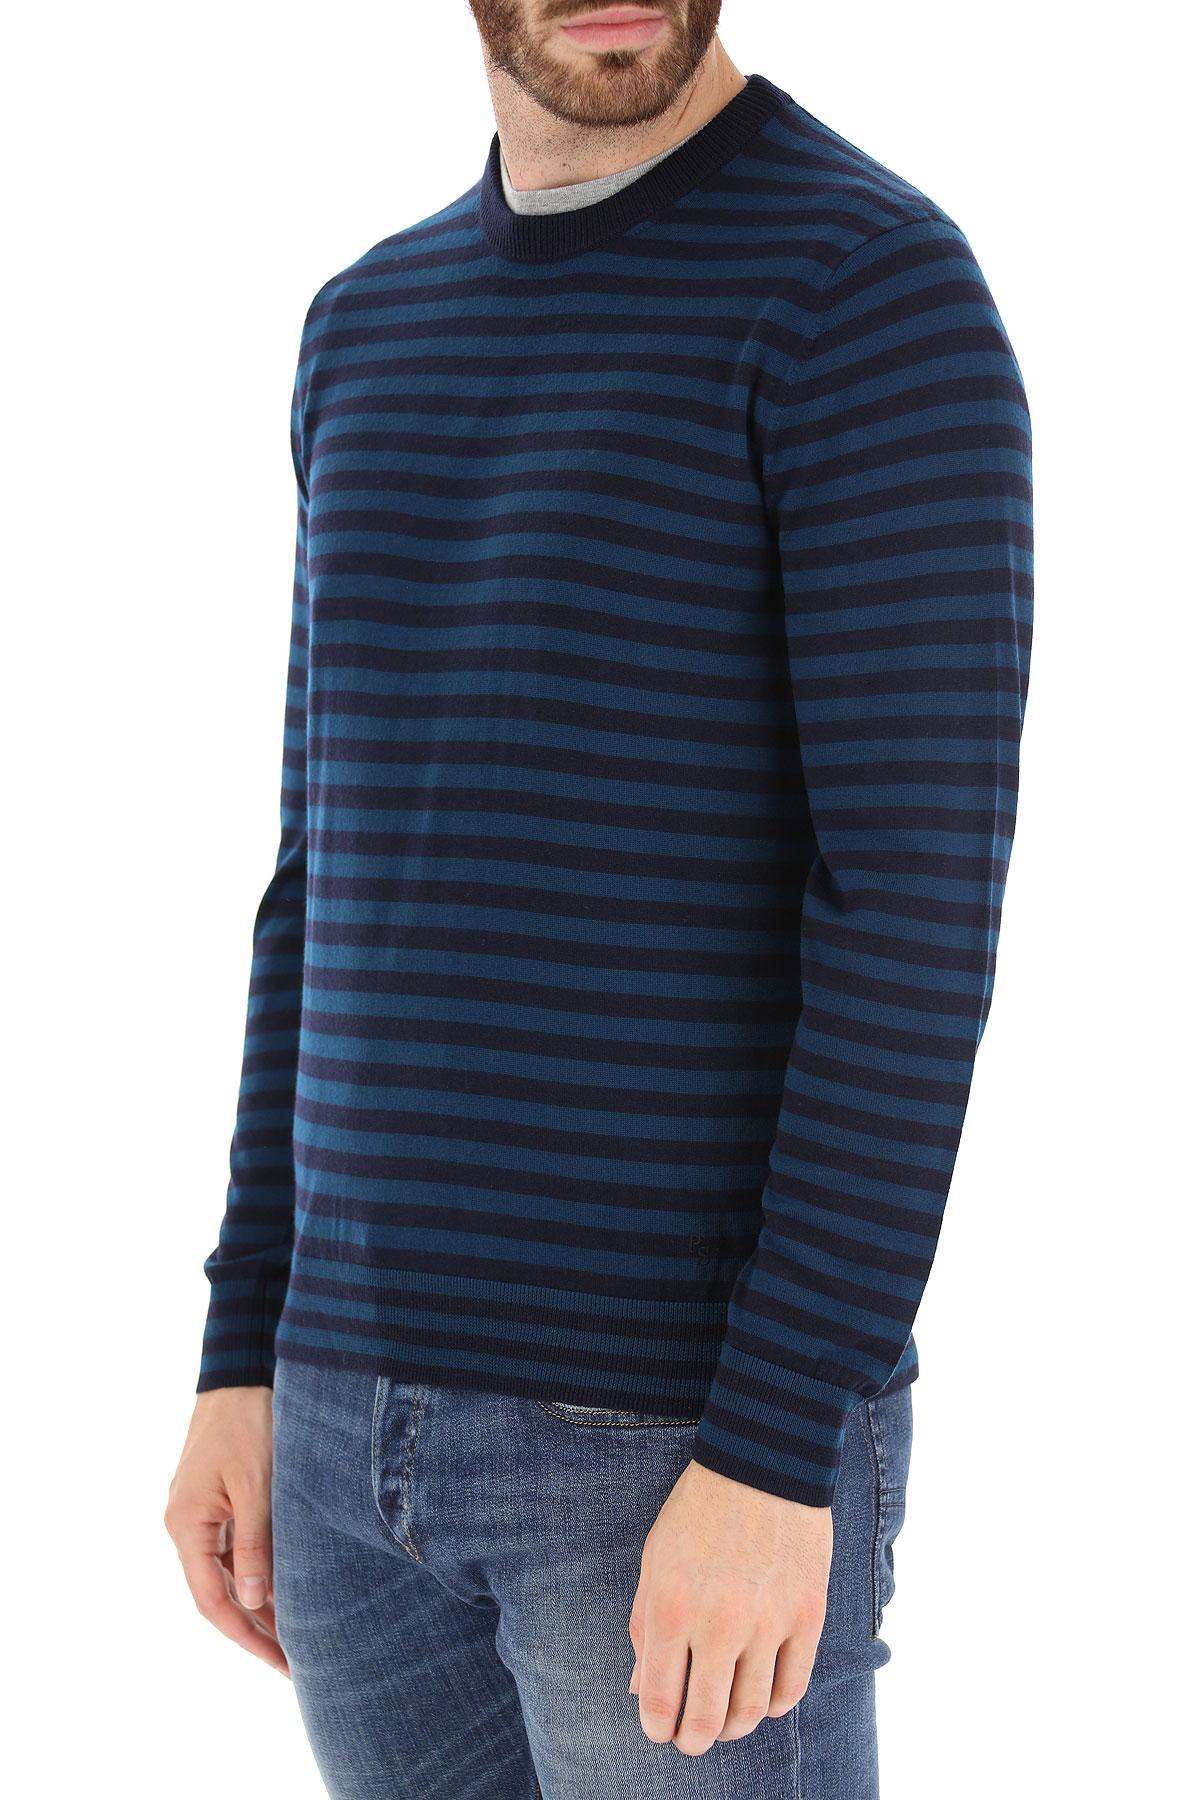 Paul Smith Wool Sweater For Men Jumper On Sale In Outlet in Blue Navy ...